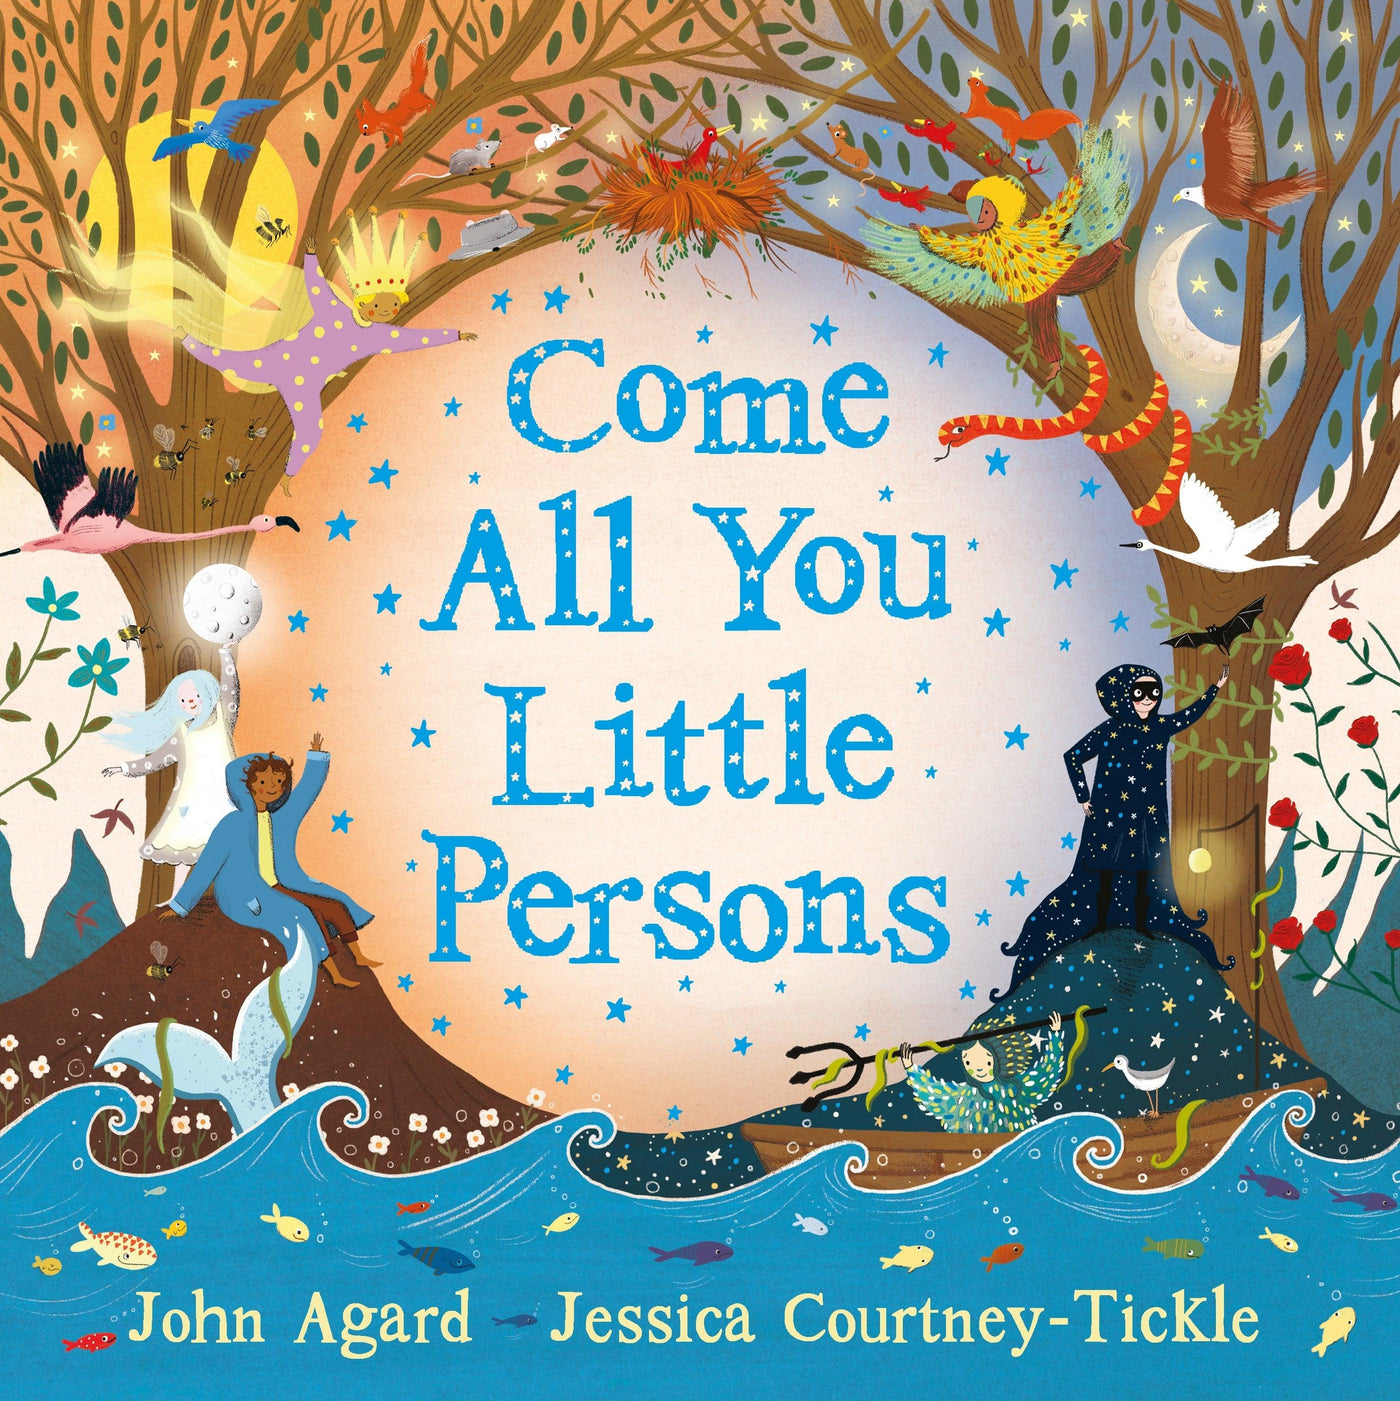 Come All You Little Persons - John Agard & Jessica Courtney Tickle